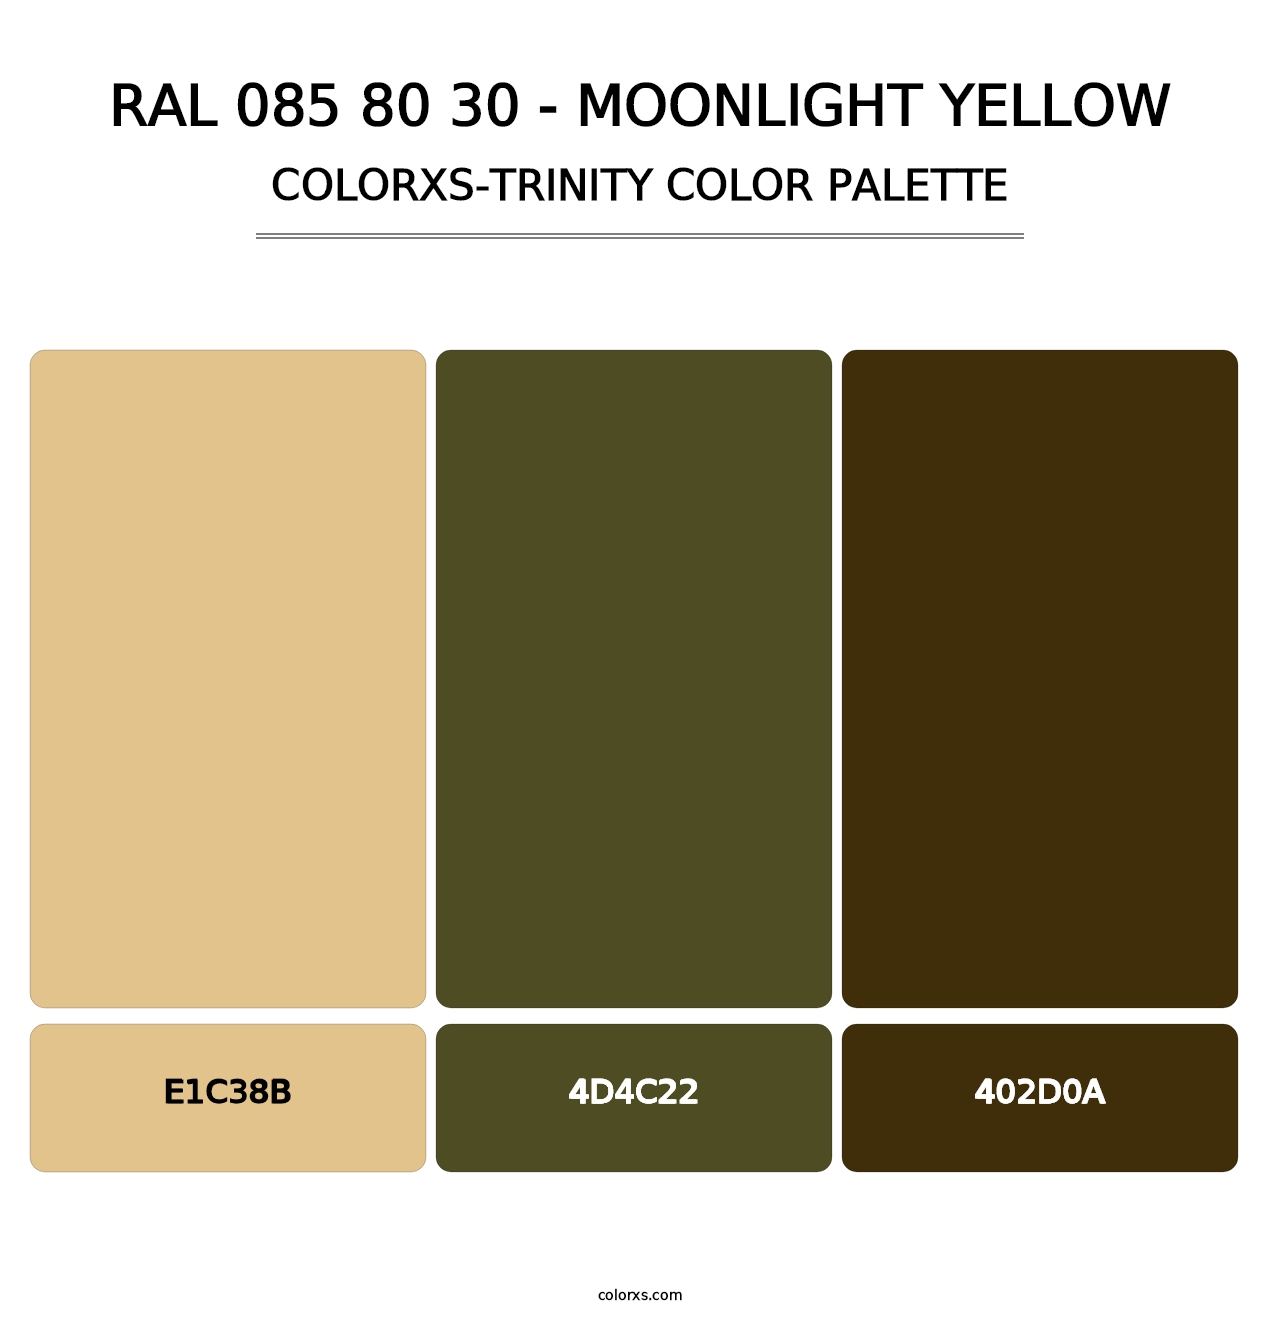 RAL 085 80 30 - Moonlight Yellow - Colorxs Trinity Palette